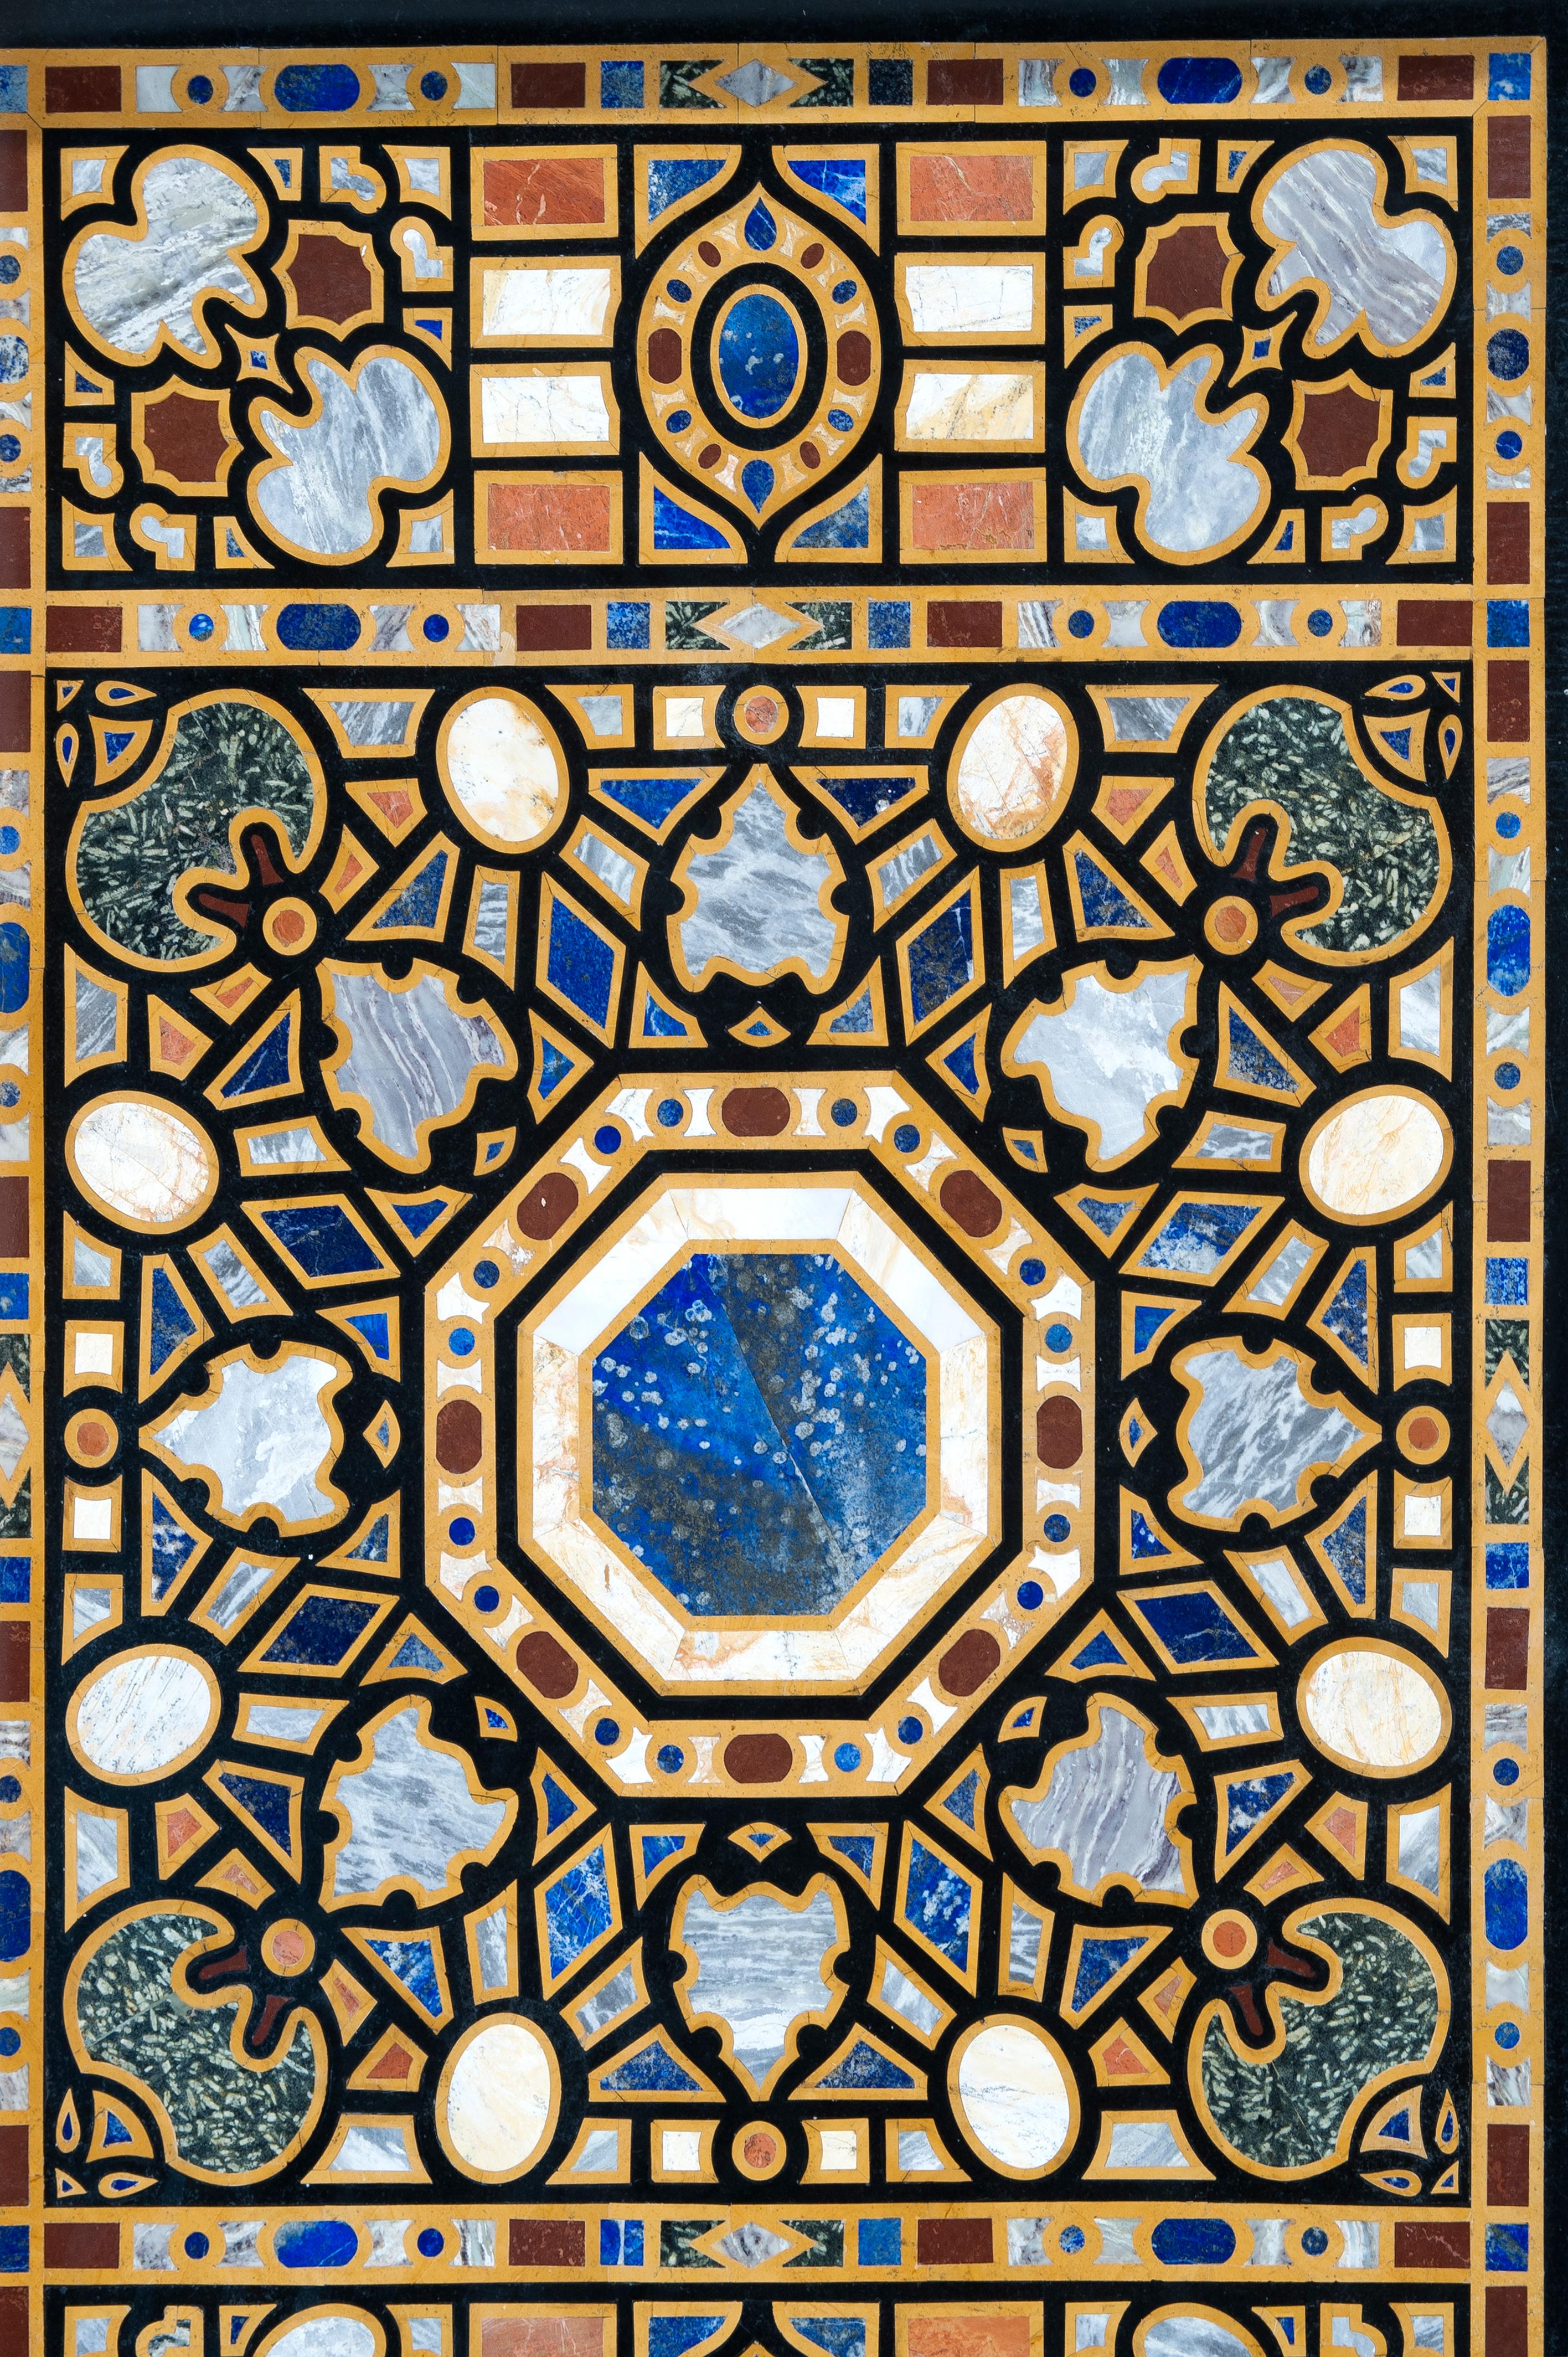 Rectangular board of marbles and hard stones. Inspired by Italian models of the XVI-XVII centuries. Rectangular table top with geometric decoration organized symmetrically around an octagon of lapis lazuli framed in a star with teardrop-shaped